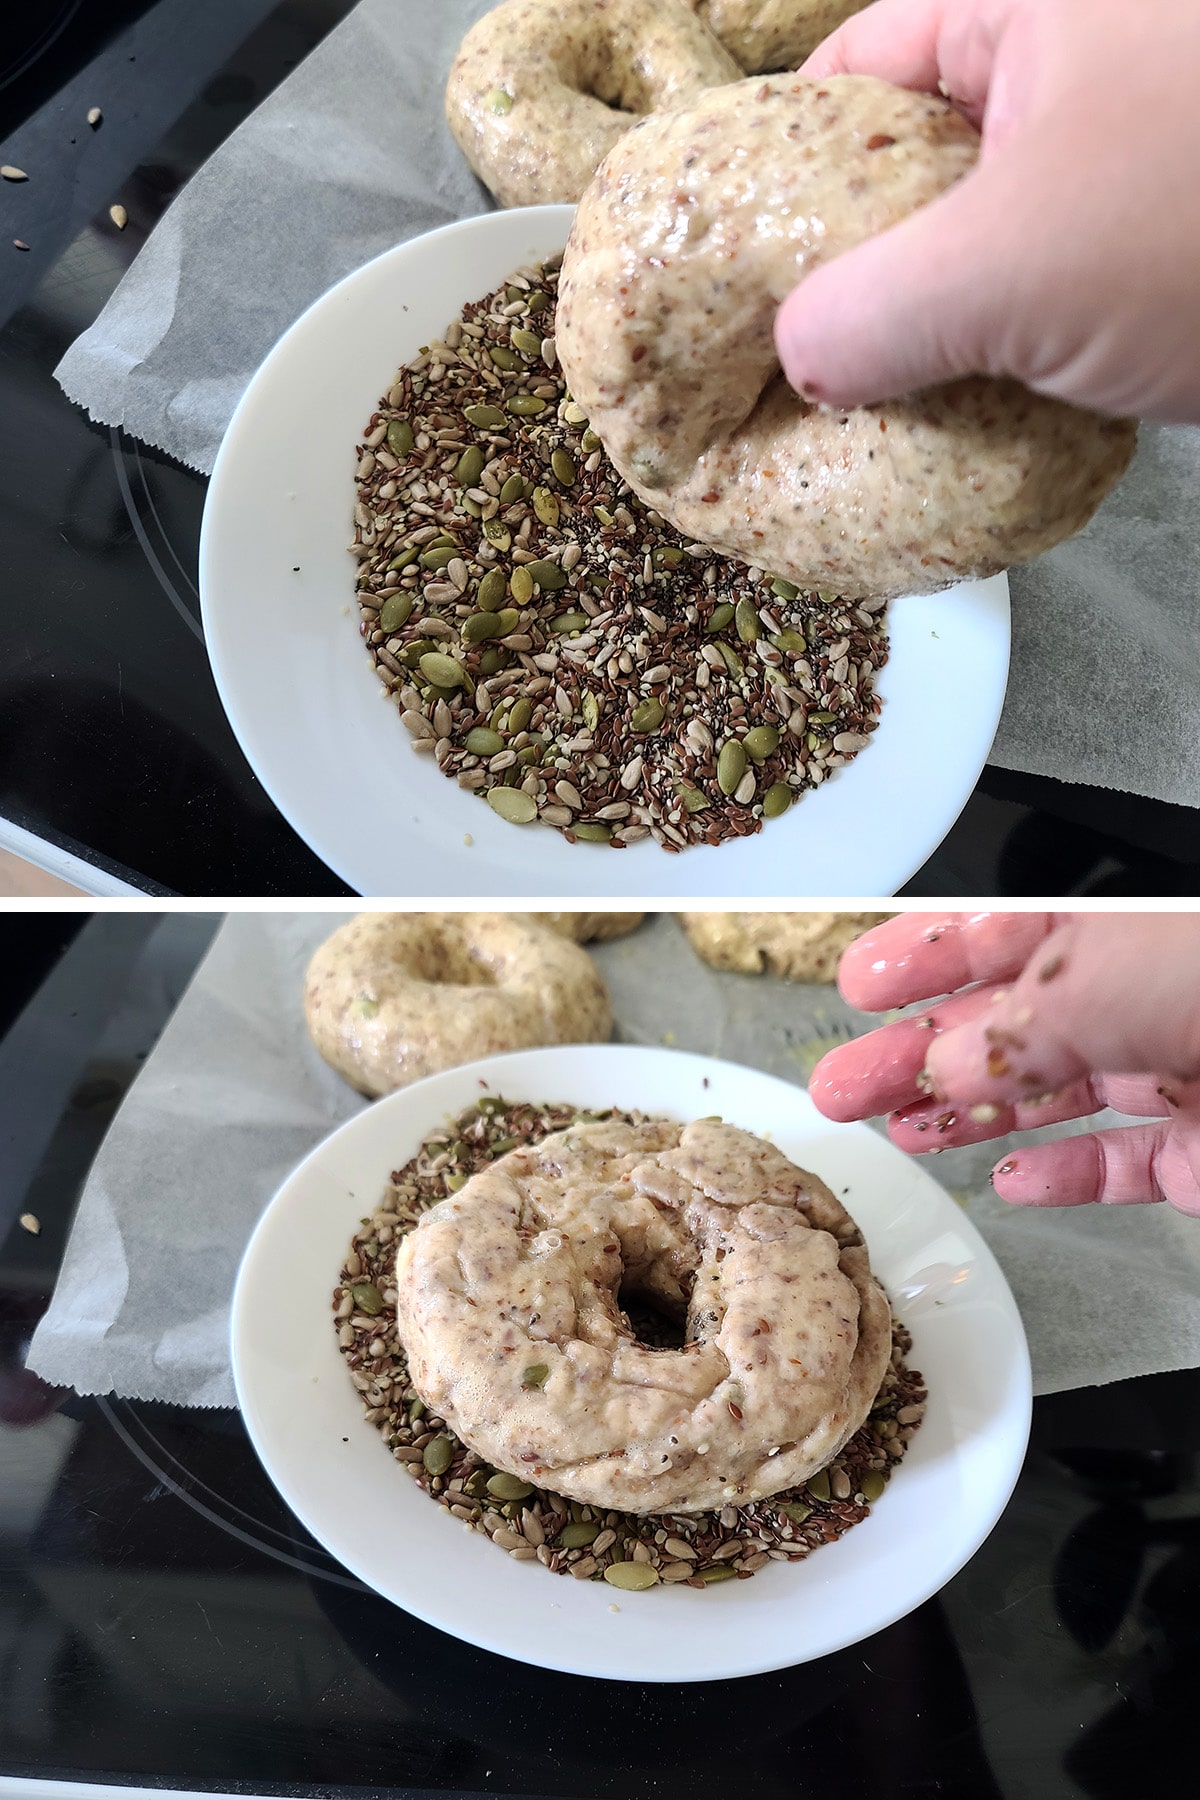 A two part image showing a hand holding a formed bagel over a bowl of seed mixture, then the bagel inverted into that mixture.